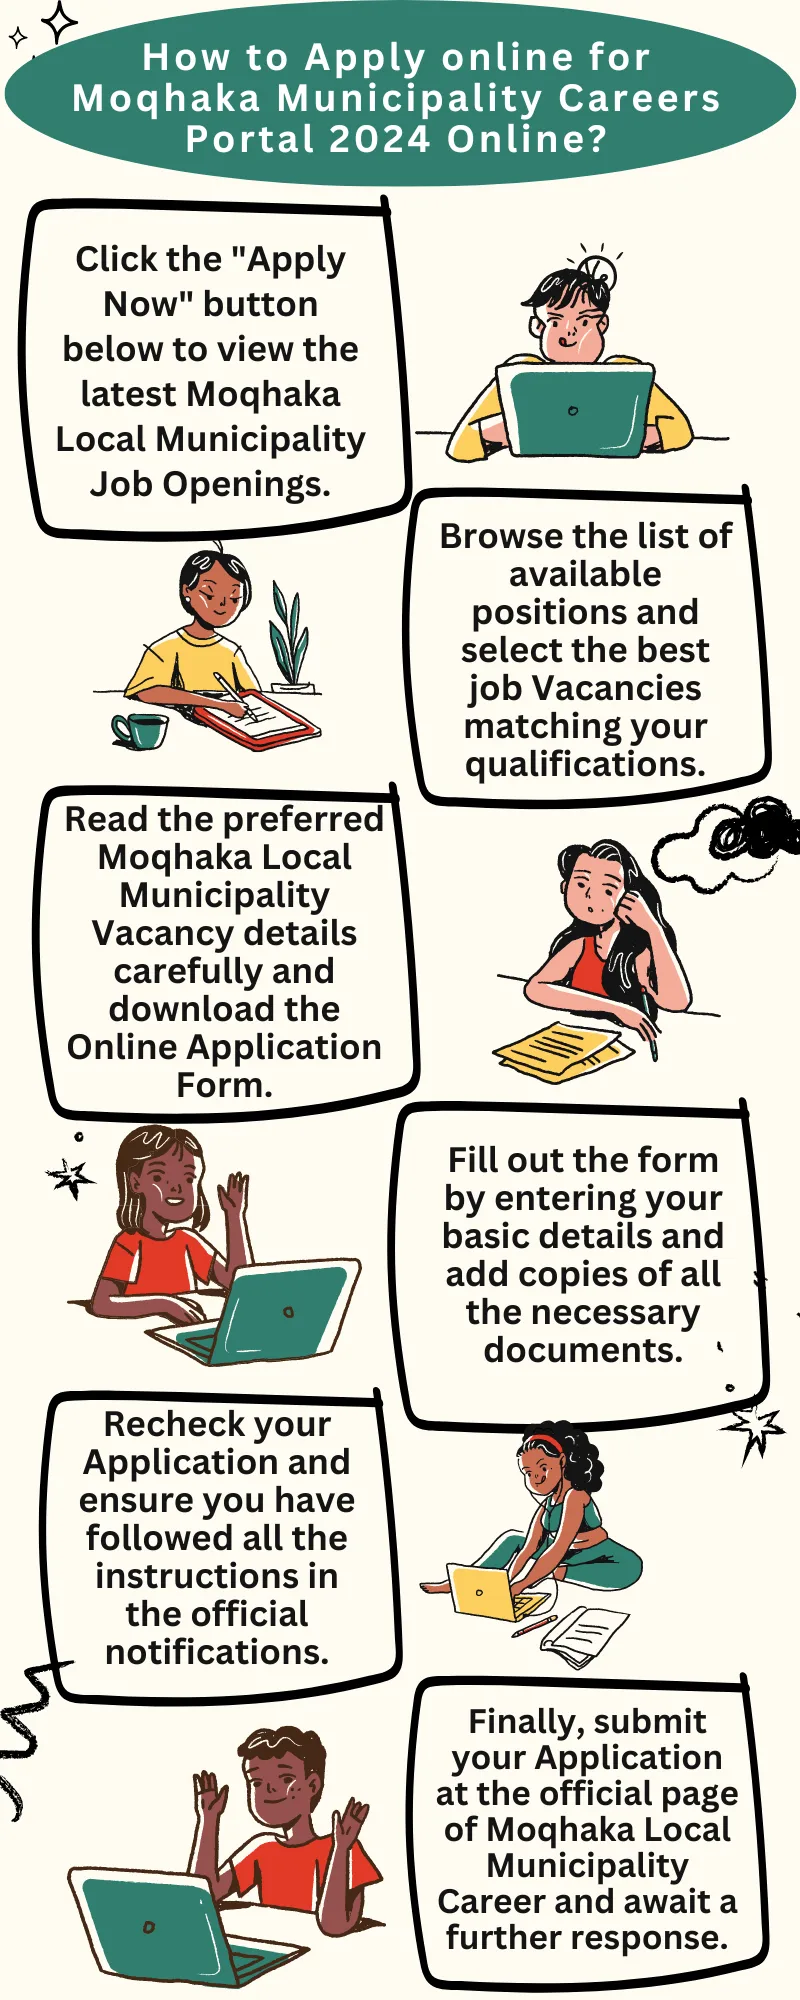 How to Apply online for Moqhaka Municipality Careers Portal 2024 Online?